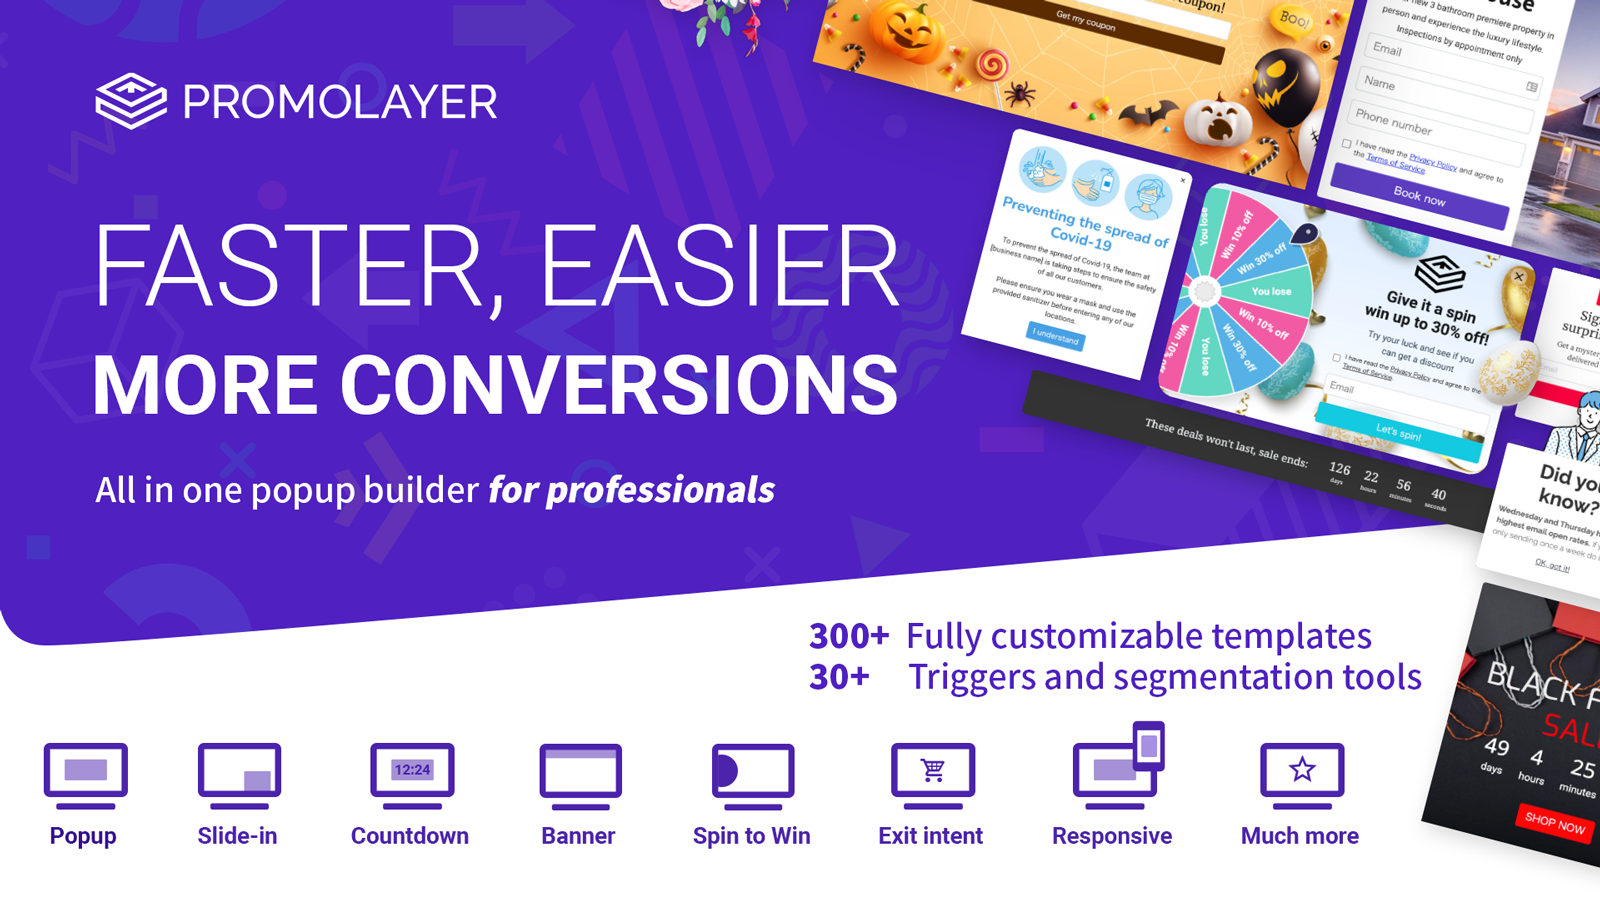 Promolayer.io All in one popups and email capture for pros